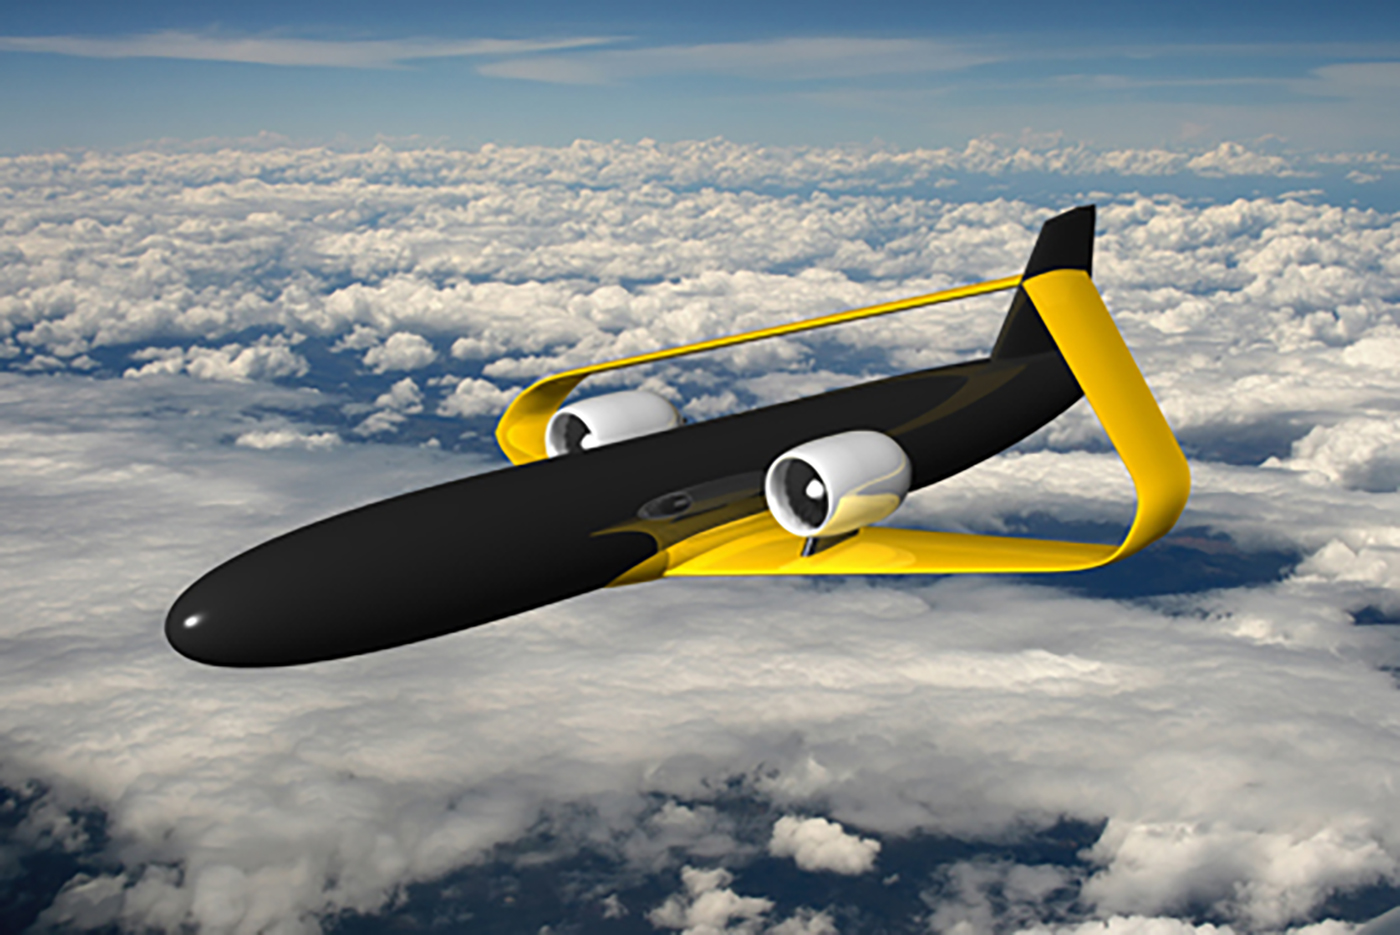 Artist computer generated concept of the Anemos-01 aircraft in flight.